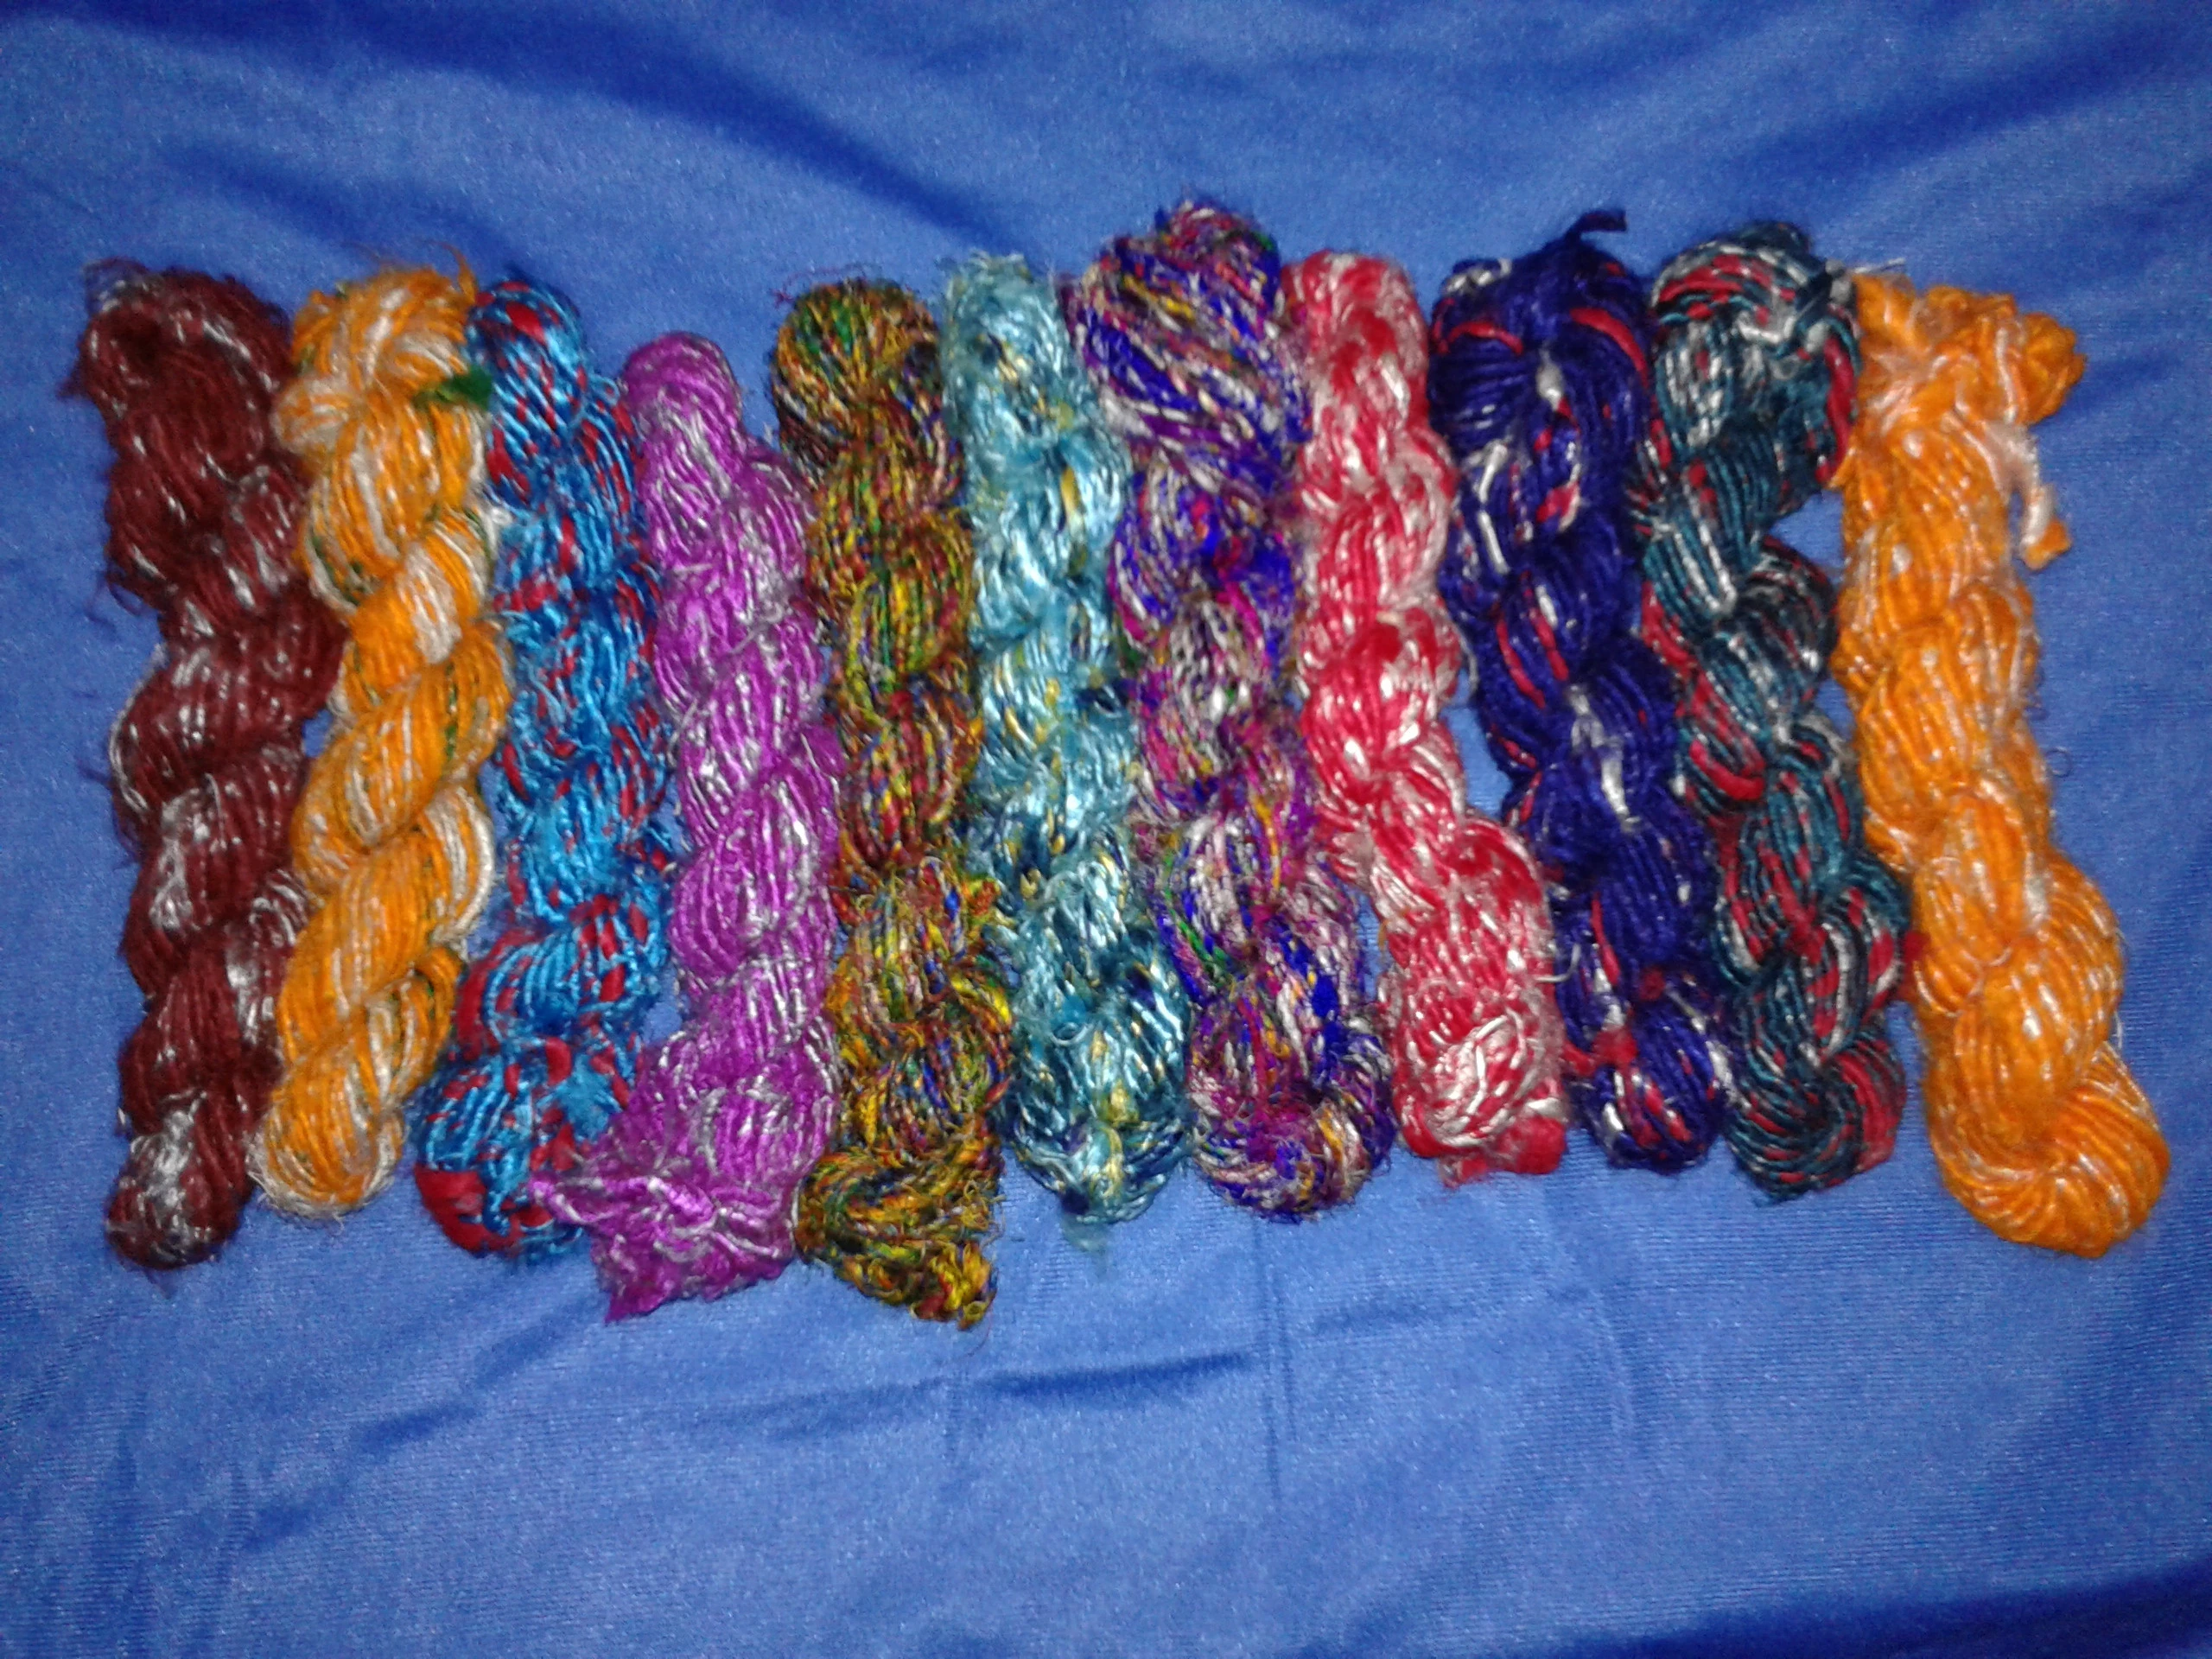 Banana Silk Yarn for Yarn Stores, Knitters, Weavers, Spinners, Fiber Stores, Art and Craft Stores